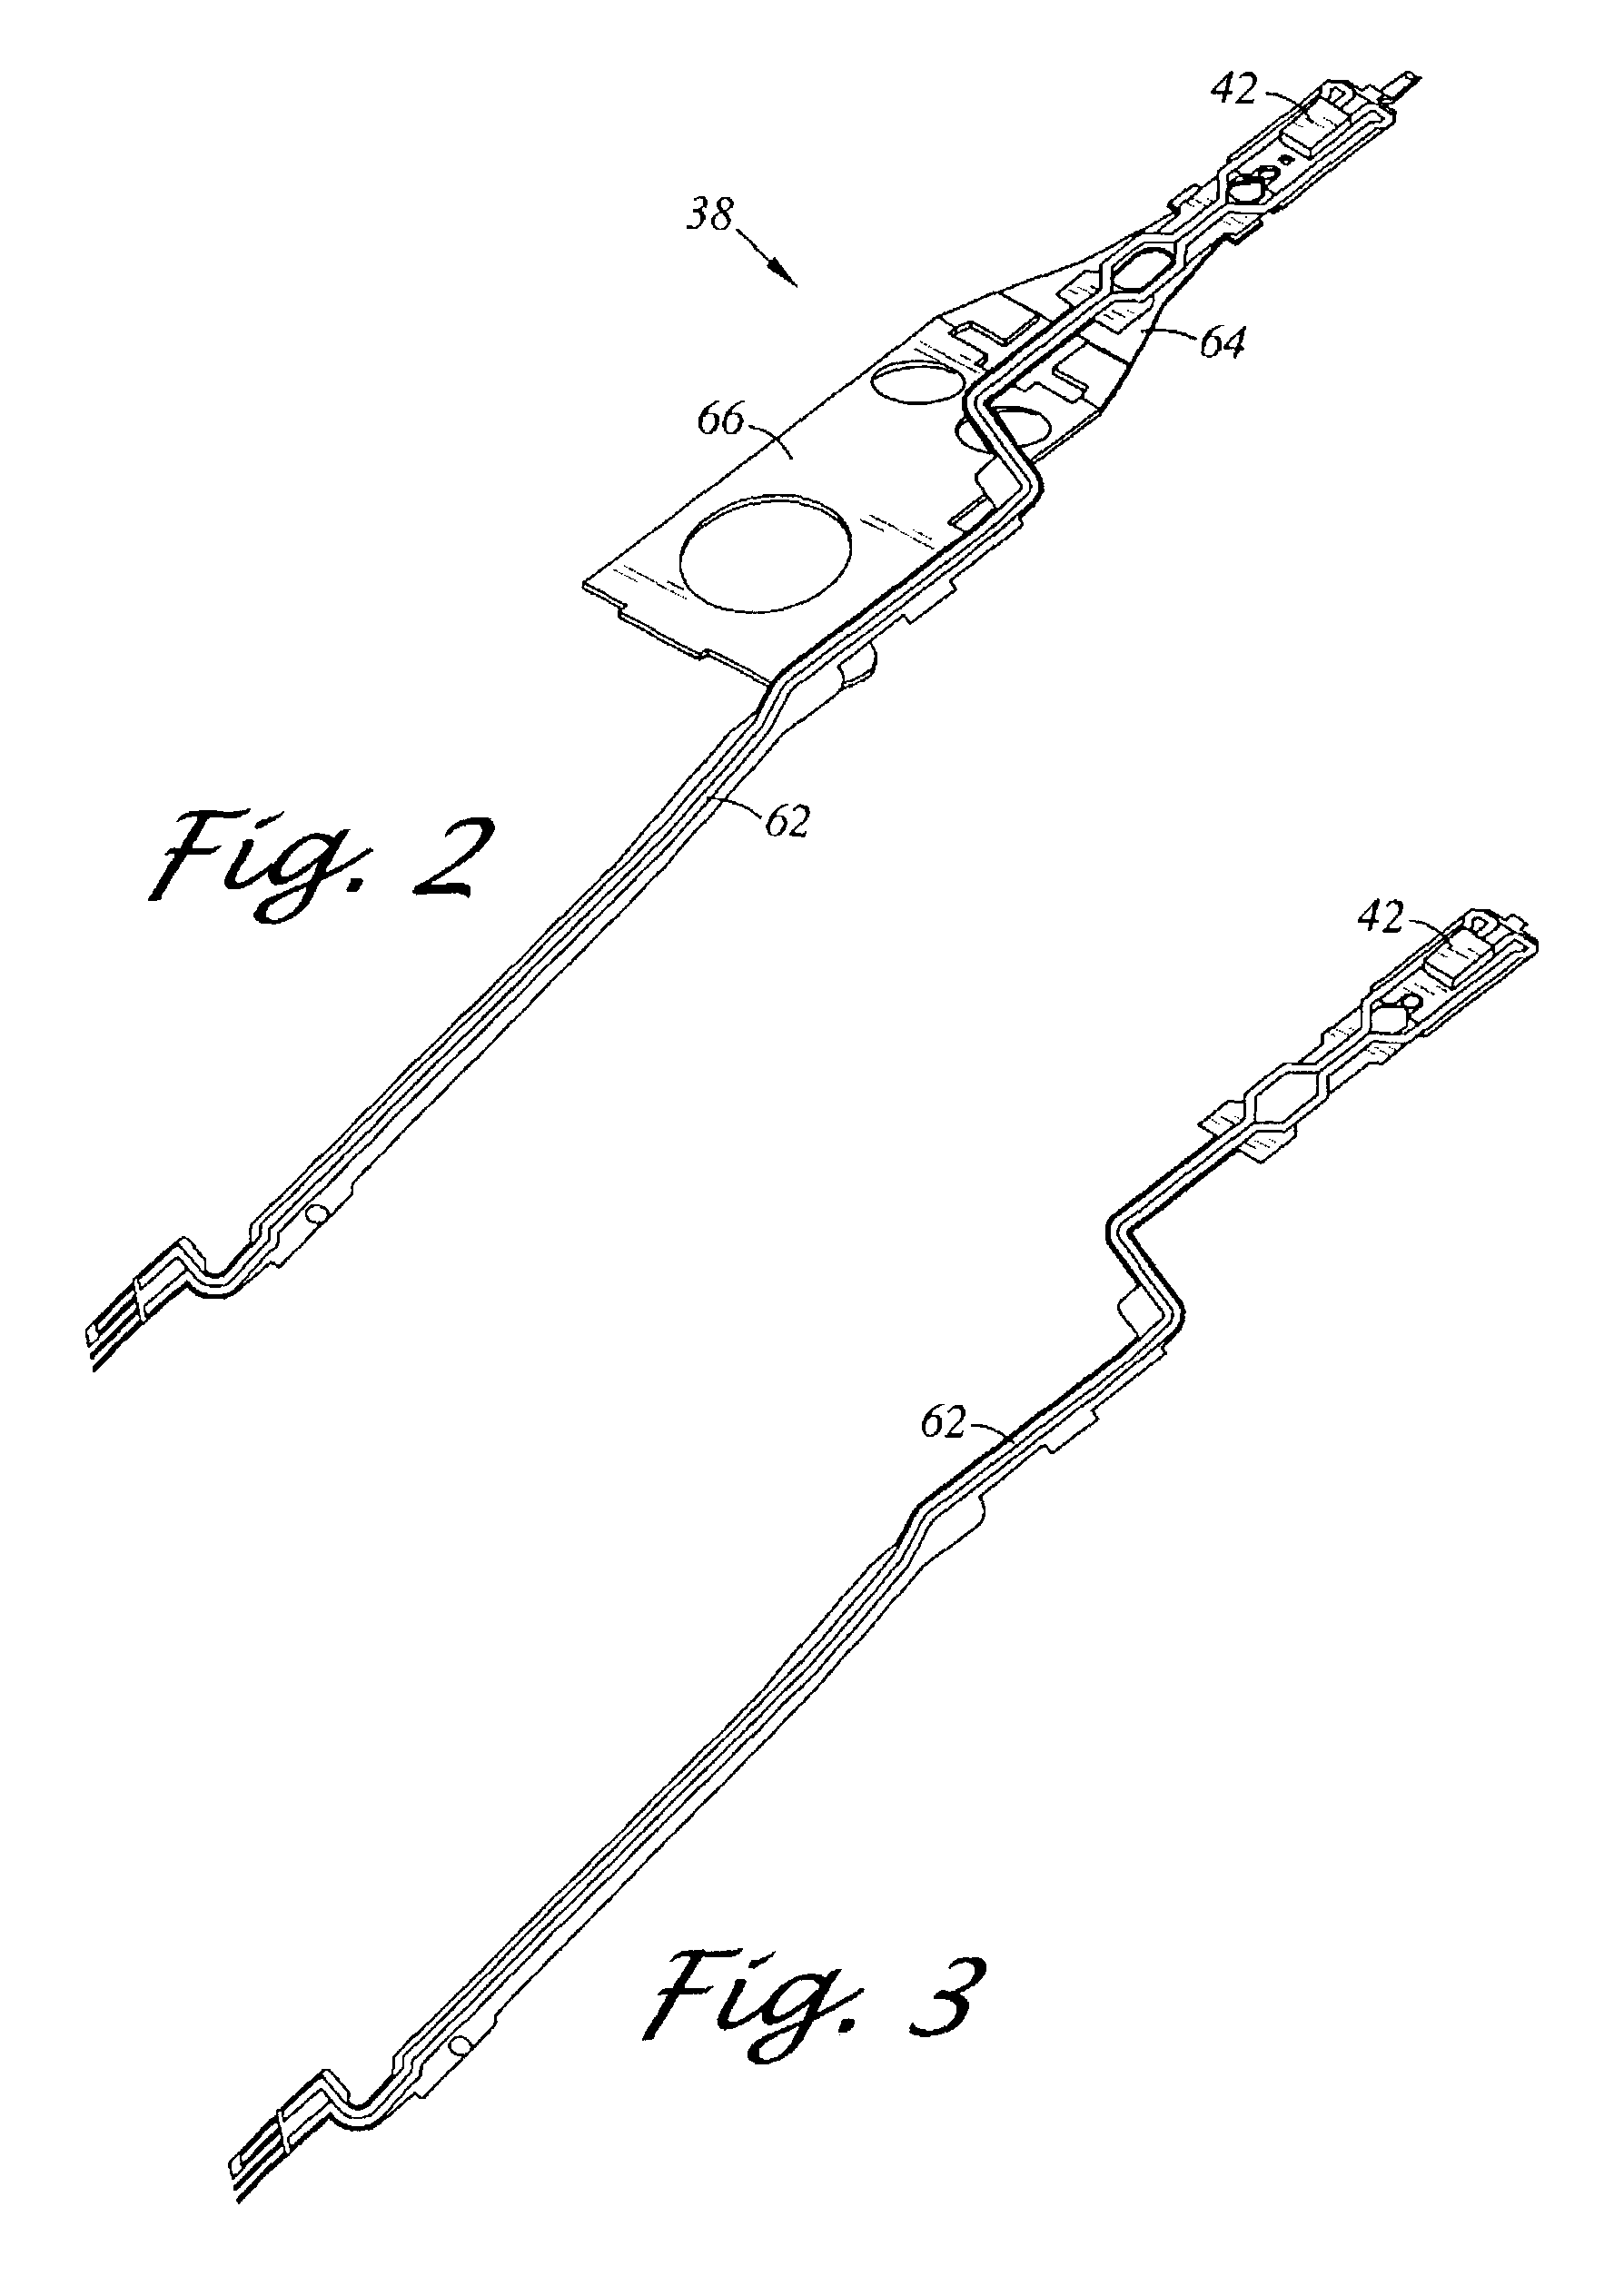 Disk drive suspension assembly including a base plate with mass reduction openings at distal corners